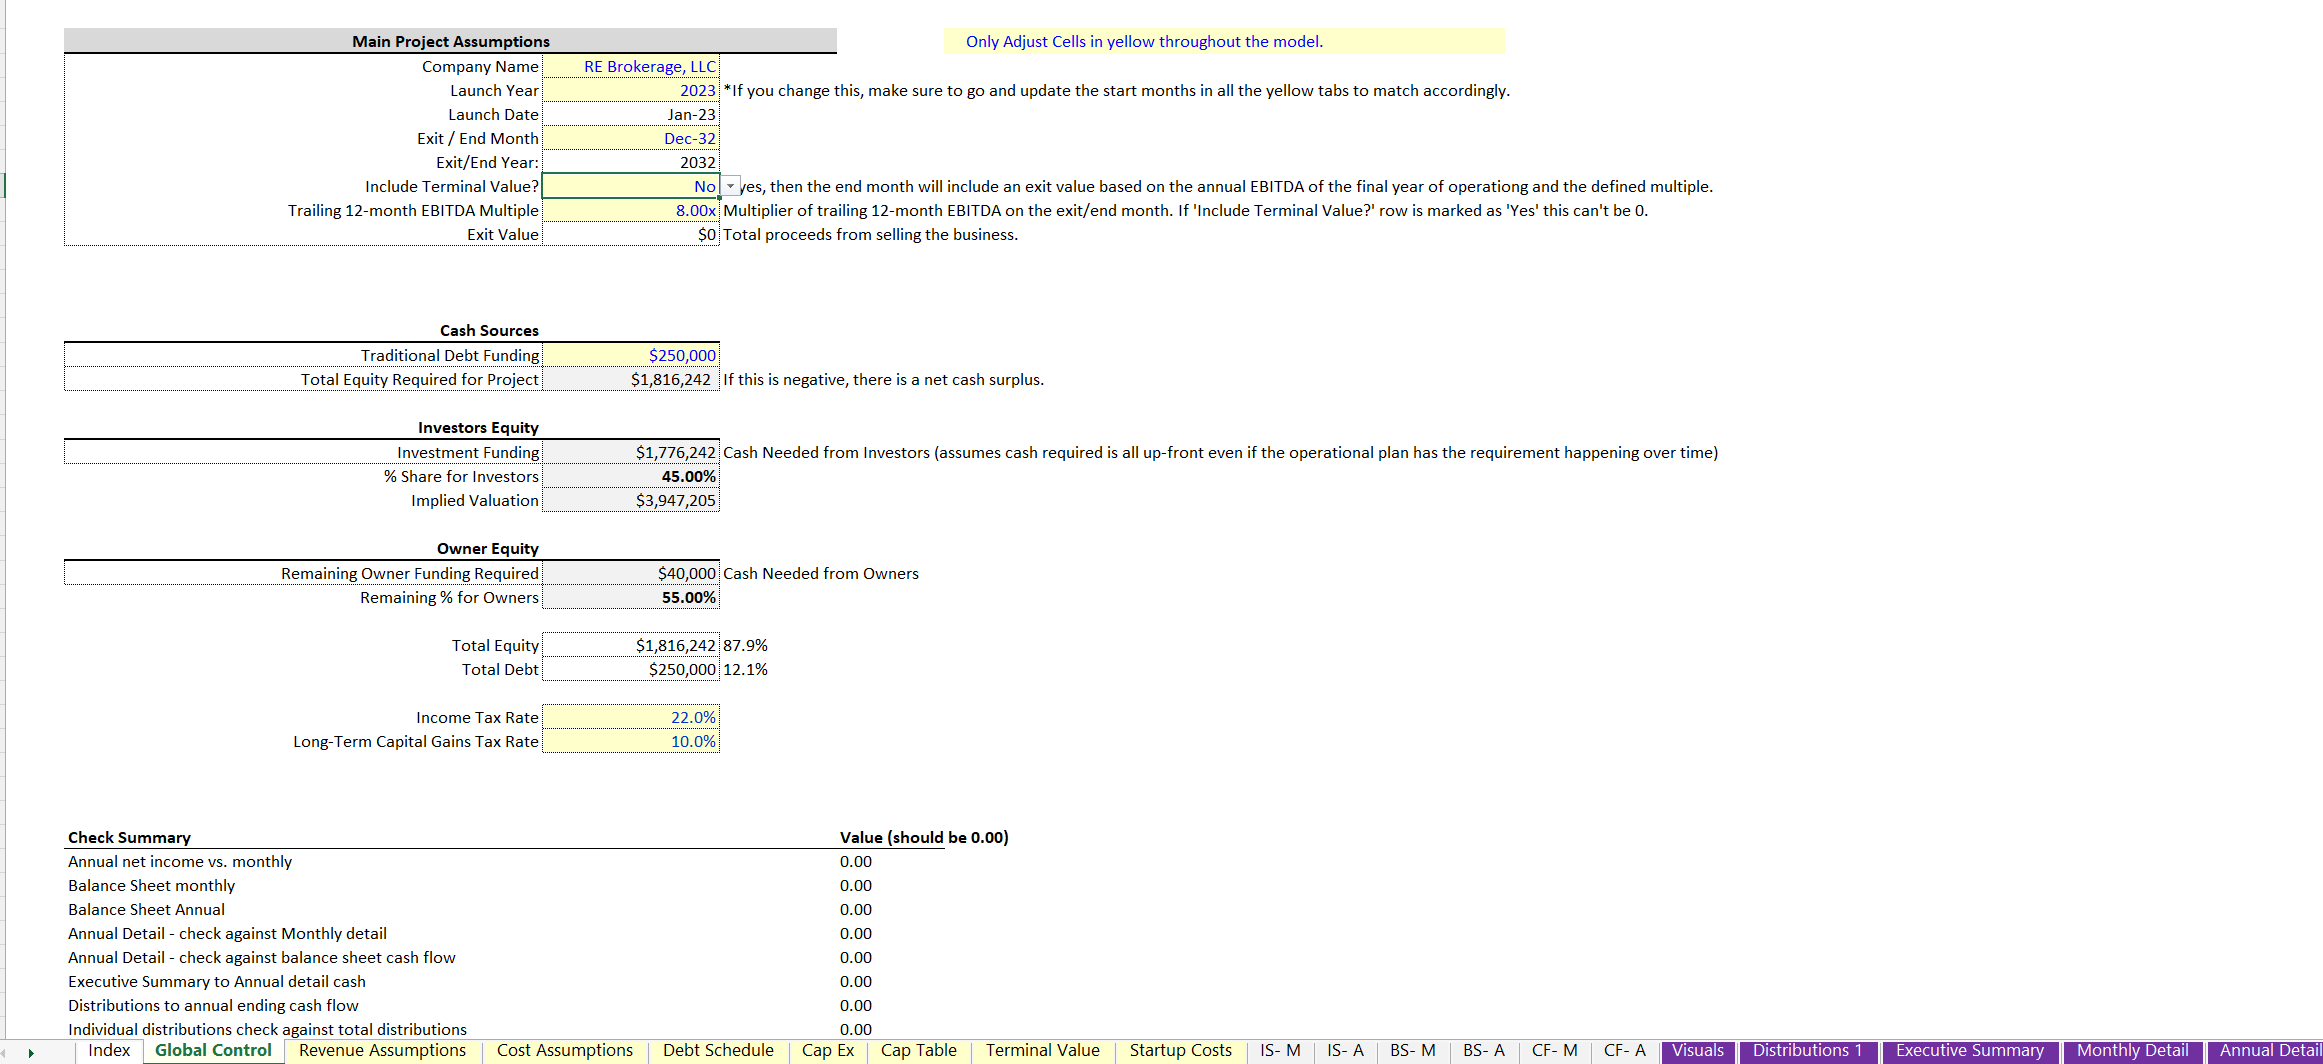 This is a partial preview of Real Estate Brokerage Feasibility Model (Excel workbook (XLSX)). 